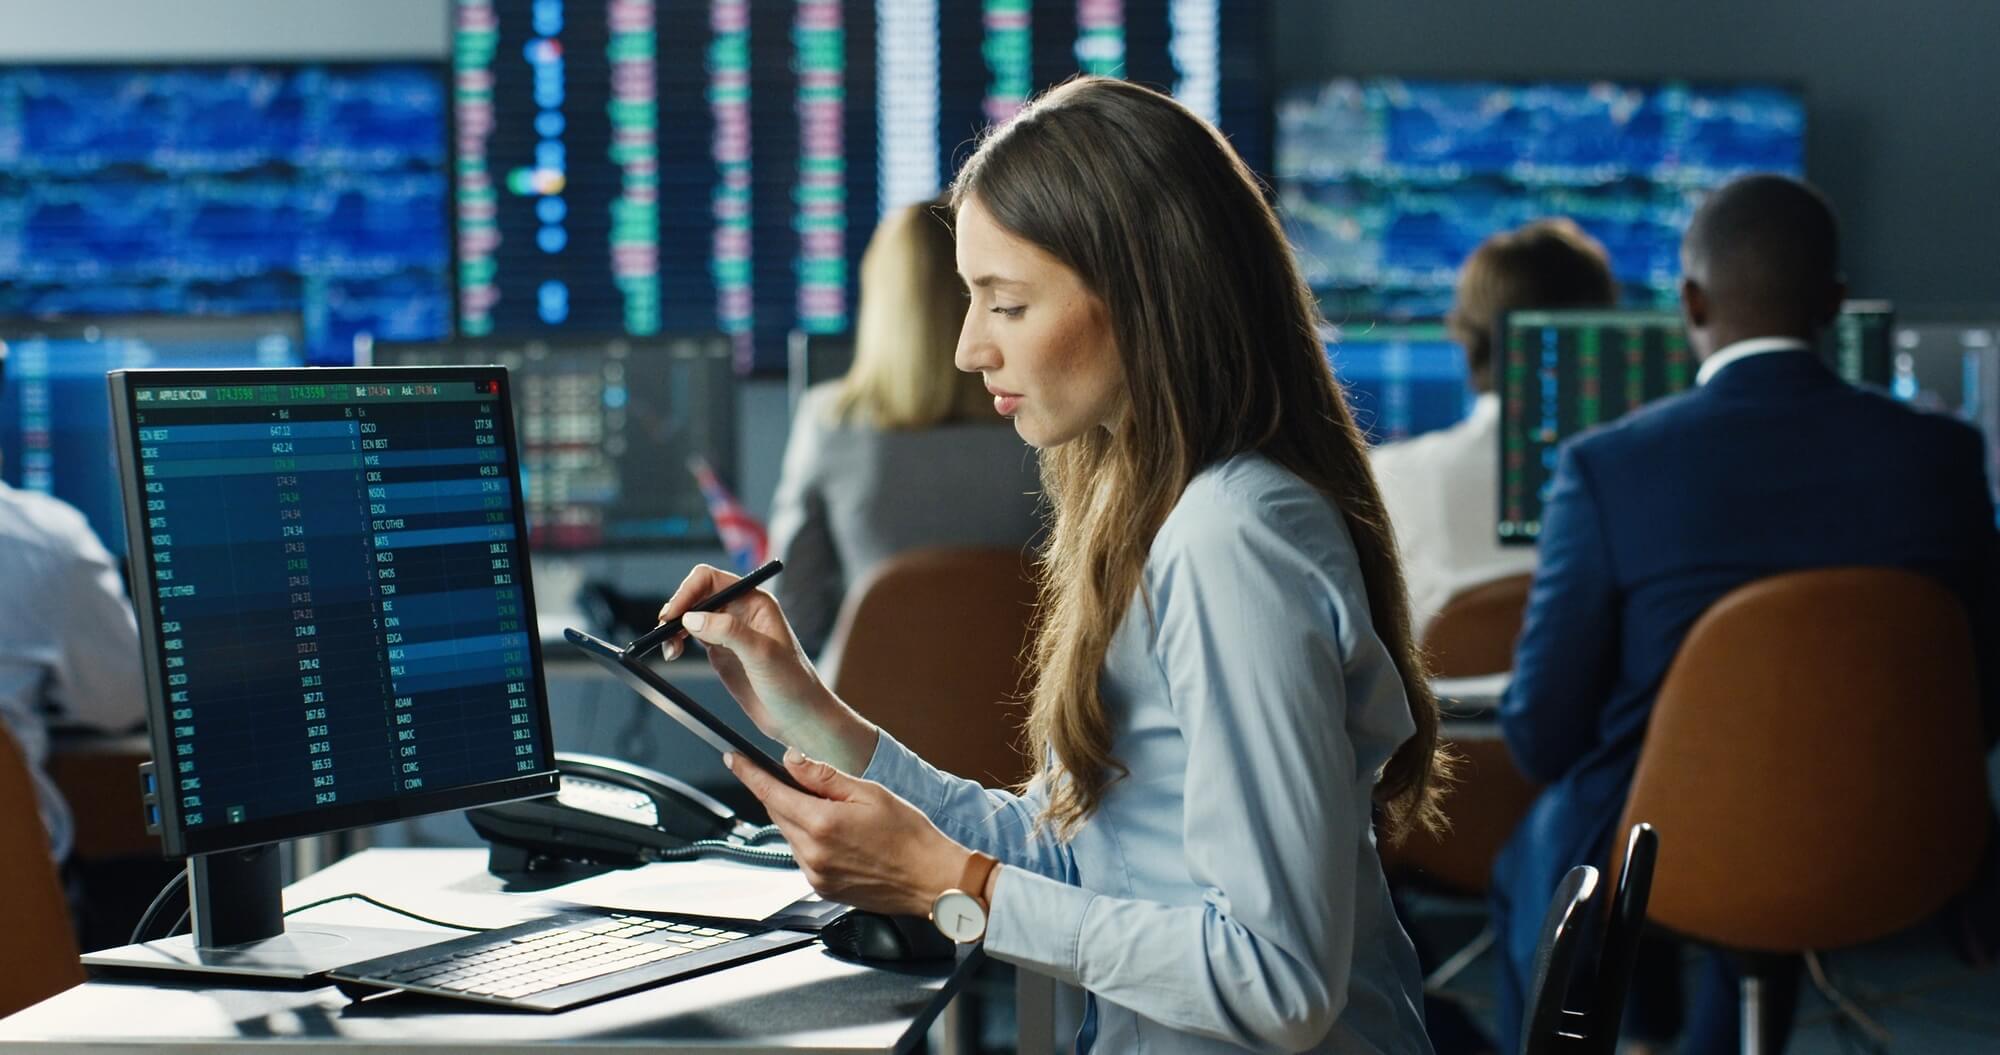 Finding the Best Trading Platform for Beginners